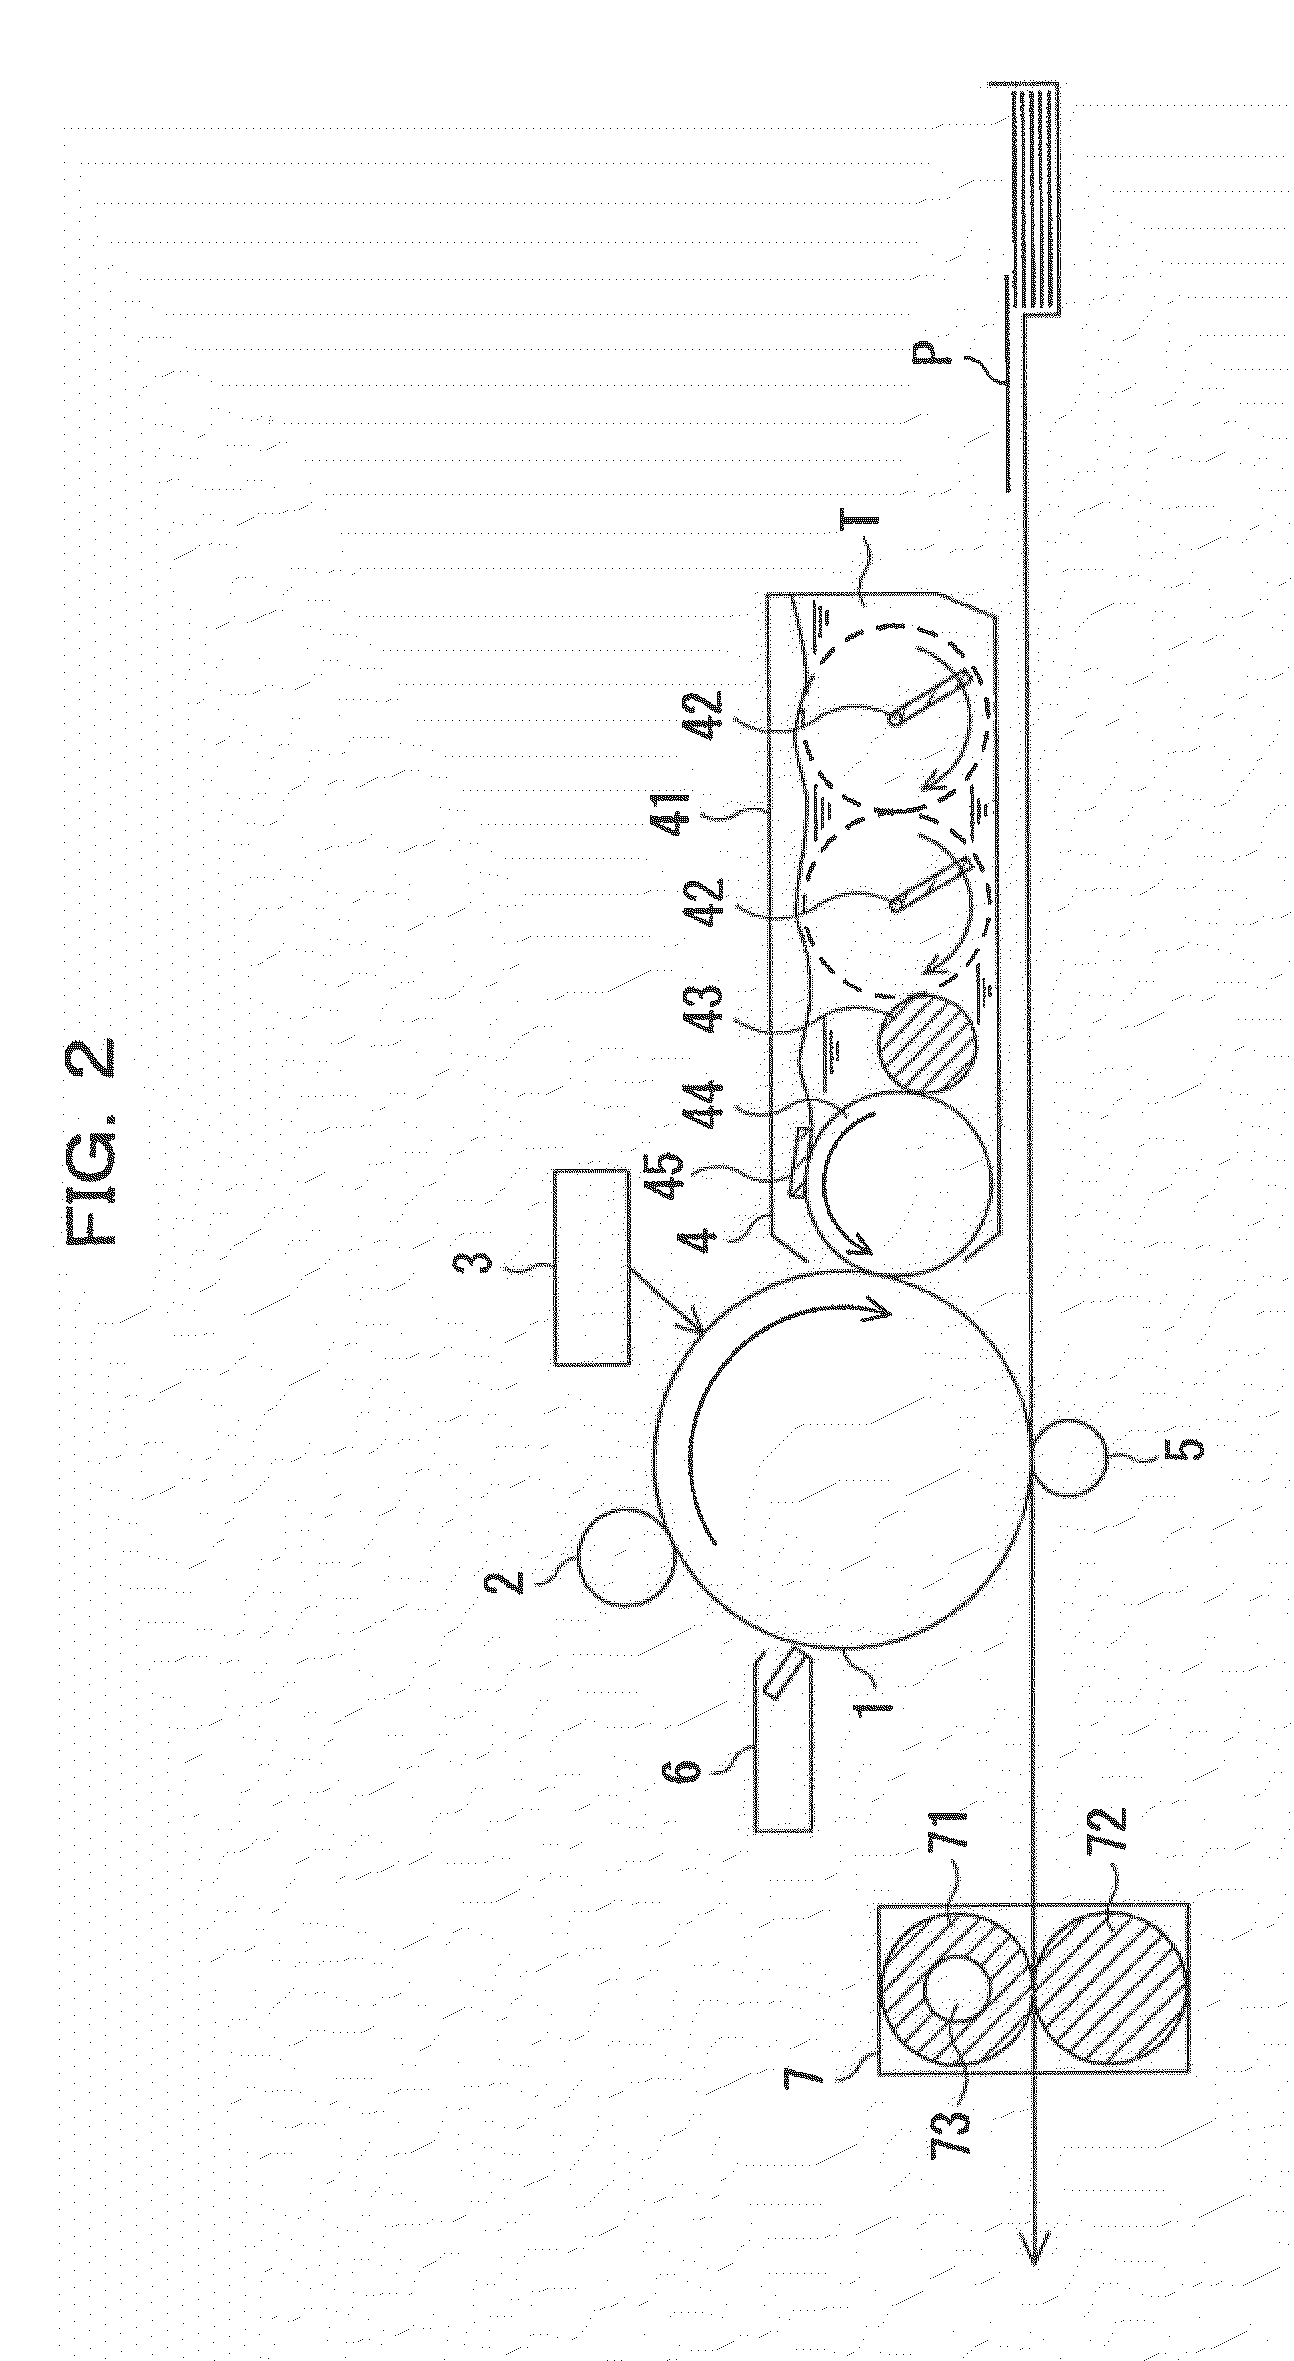 Image-forming apparatus and cartridge